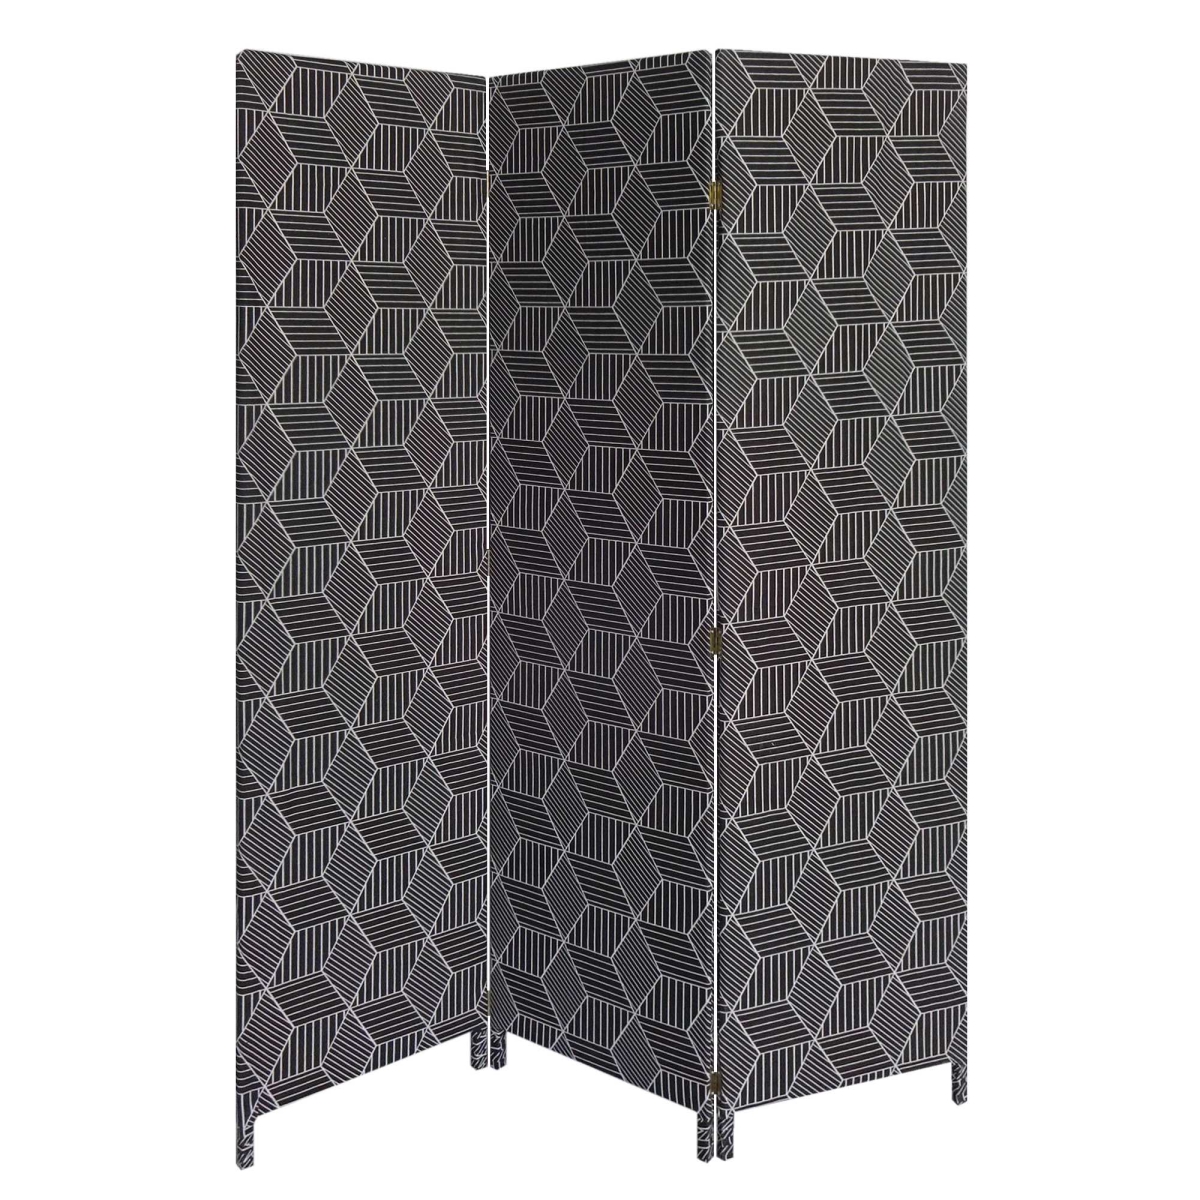 379910 3 Panel Soft Fabric Room Divider, Black - 71 X 47 X 1 In.